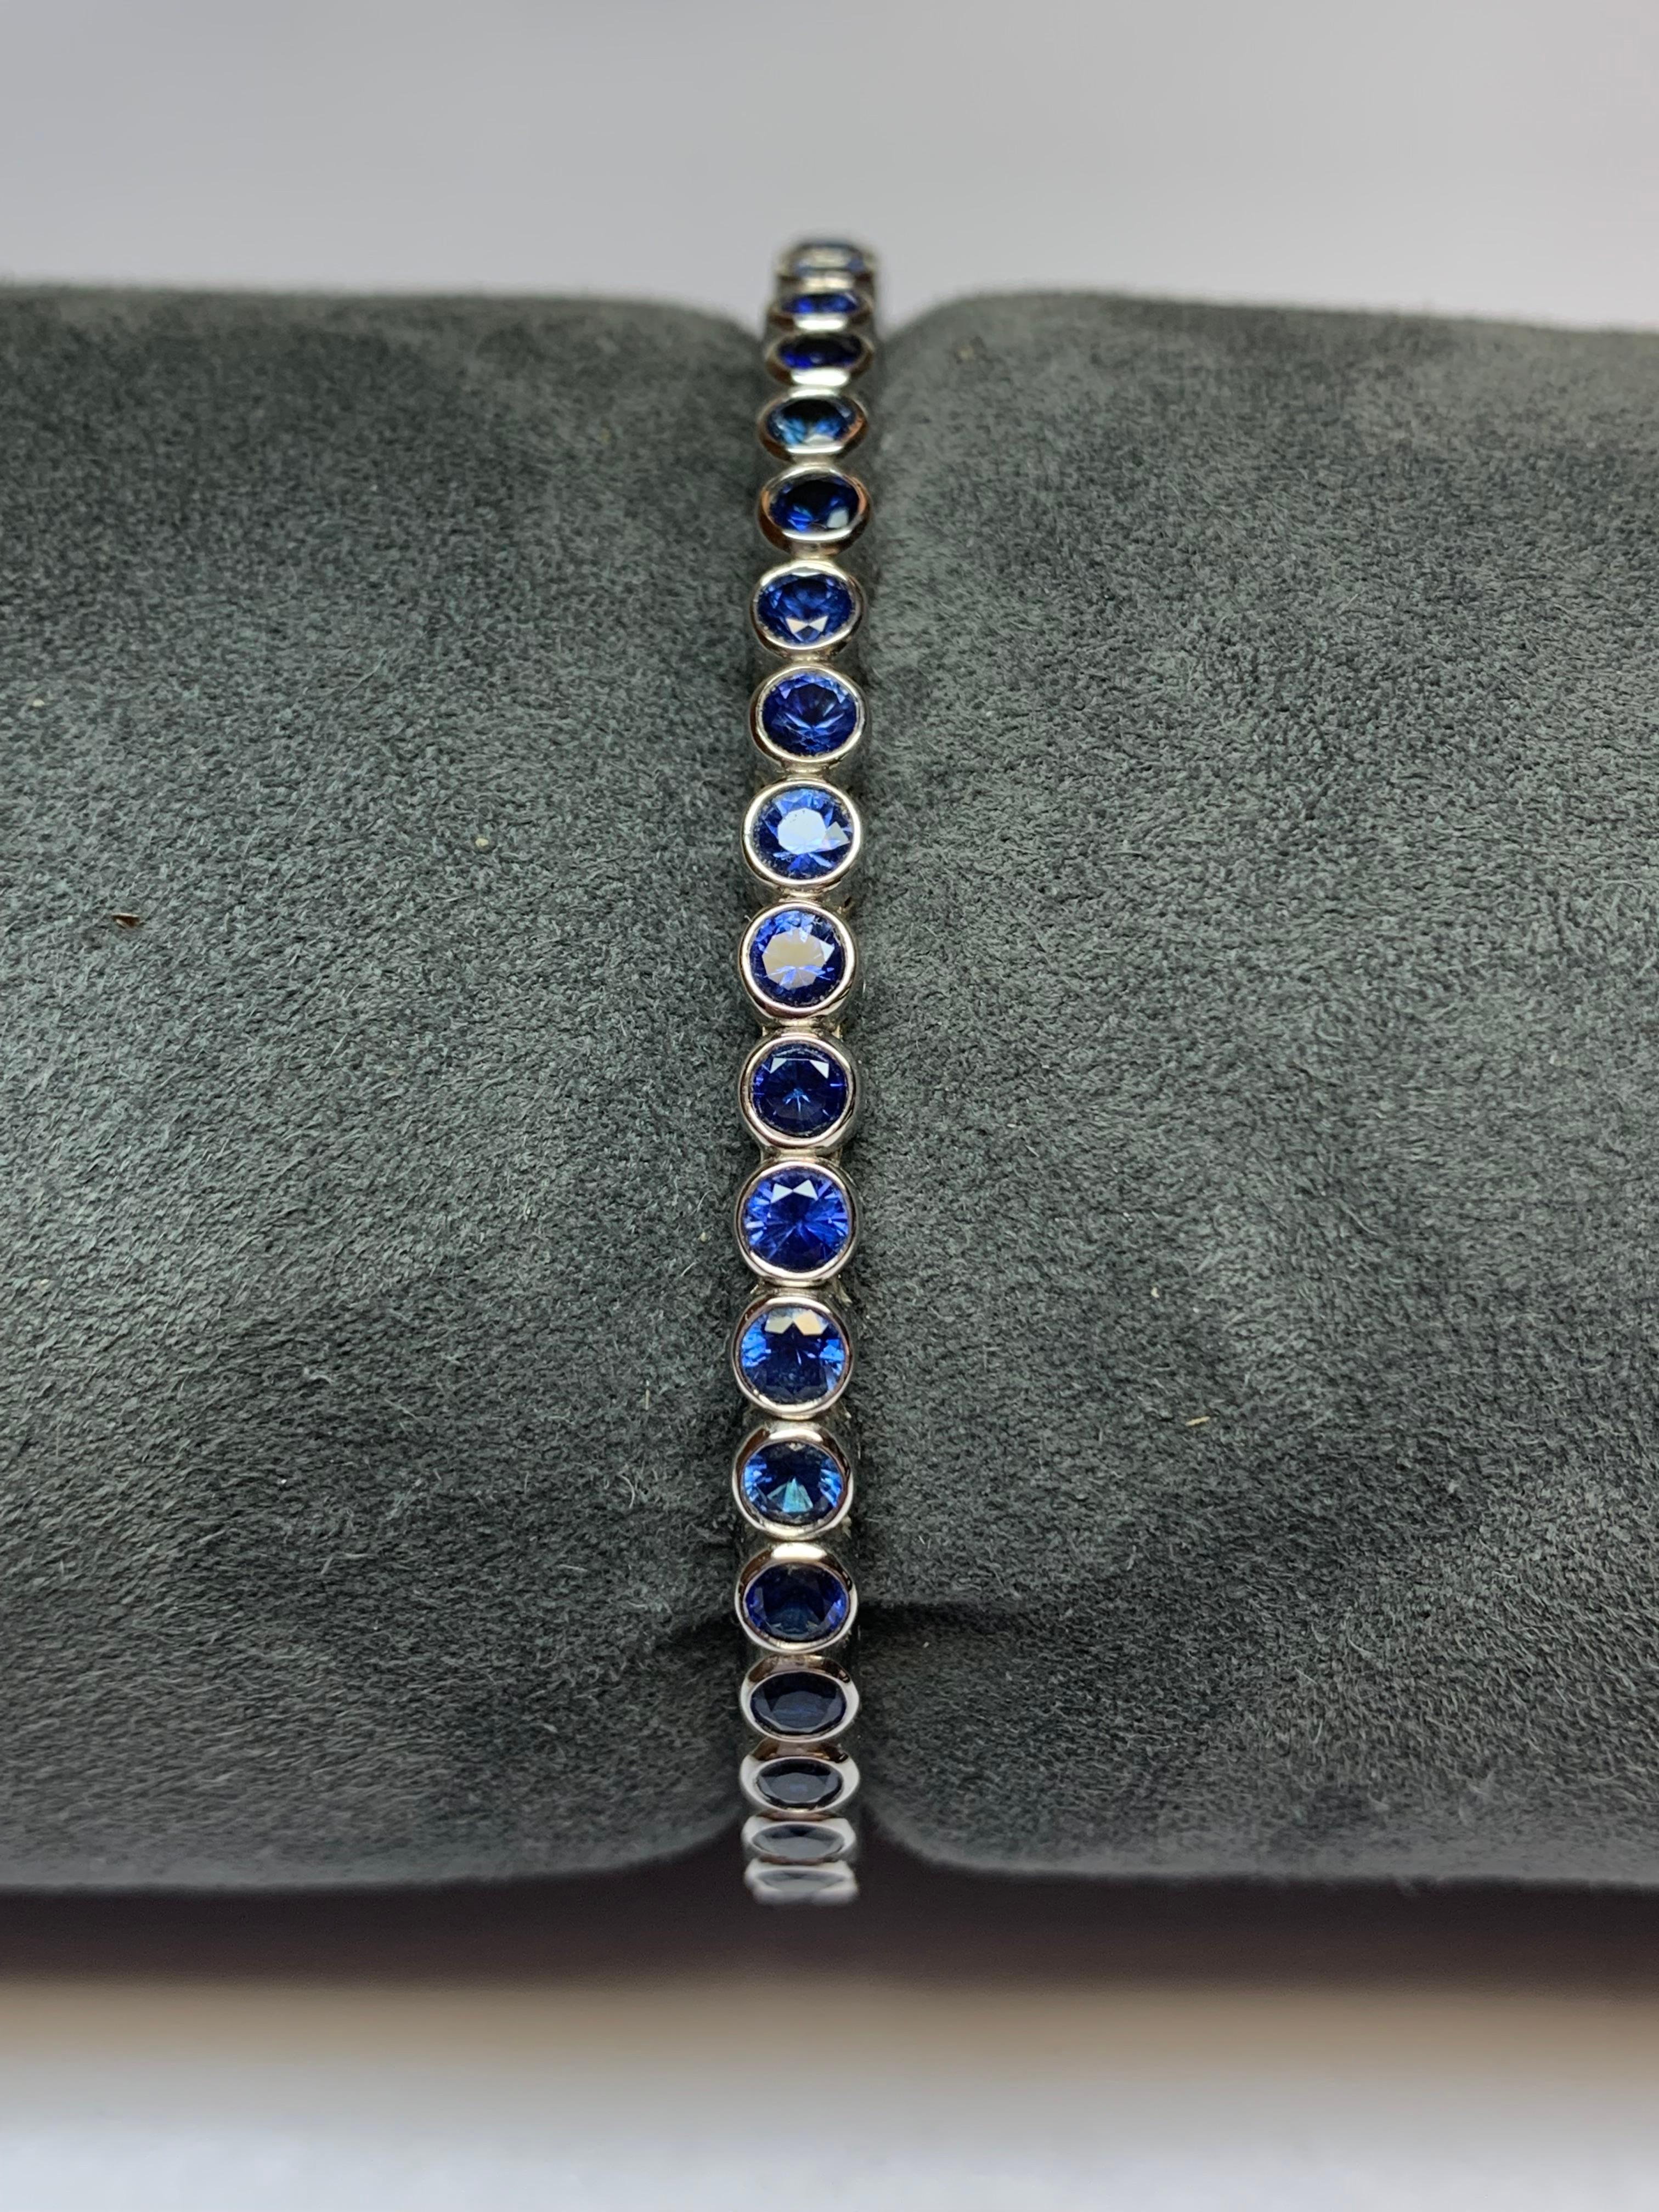 This Jean Vitau classic spring loaded bangle bracelet set with 5.16 carats of cornflower Blue Sapphires, all perfectly bezel set, is incredible. The triple spring action allows it to sit securely and comfortably on any wrist. We make this piece in